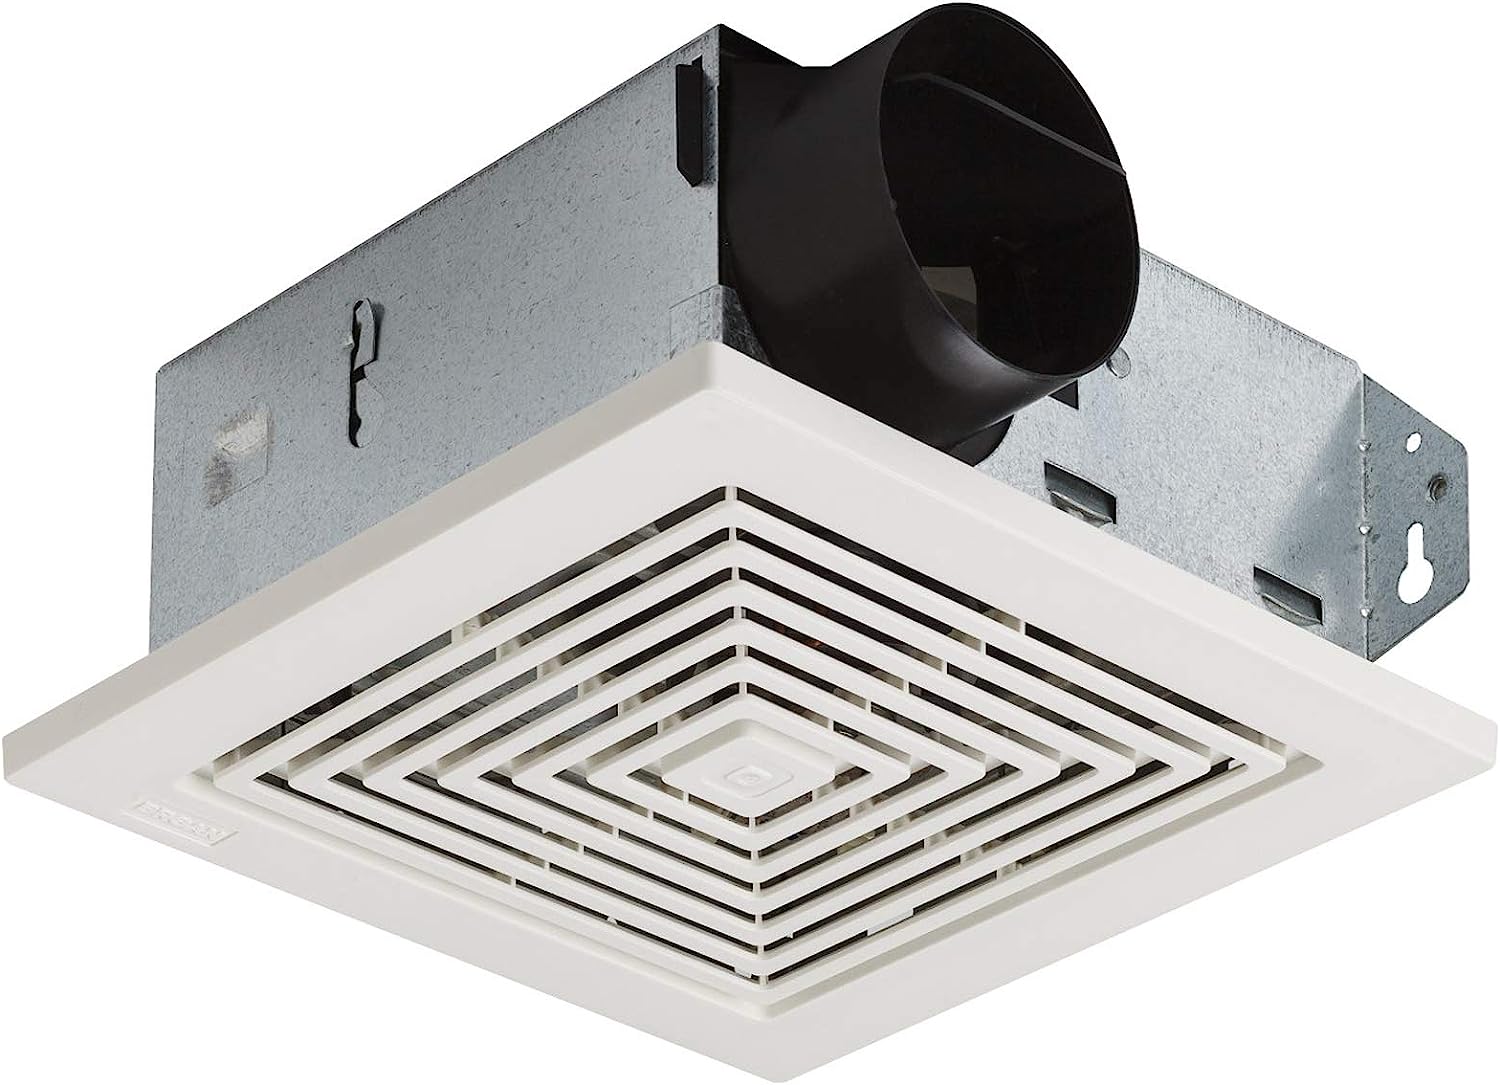 Broan-NuTone 688 Ceiling and Wall Ventilation, 50 CFM [...]